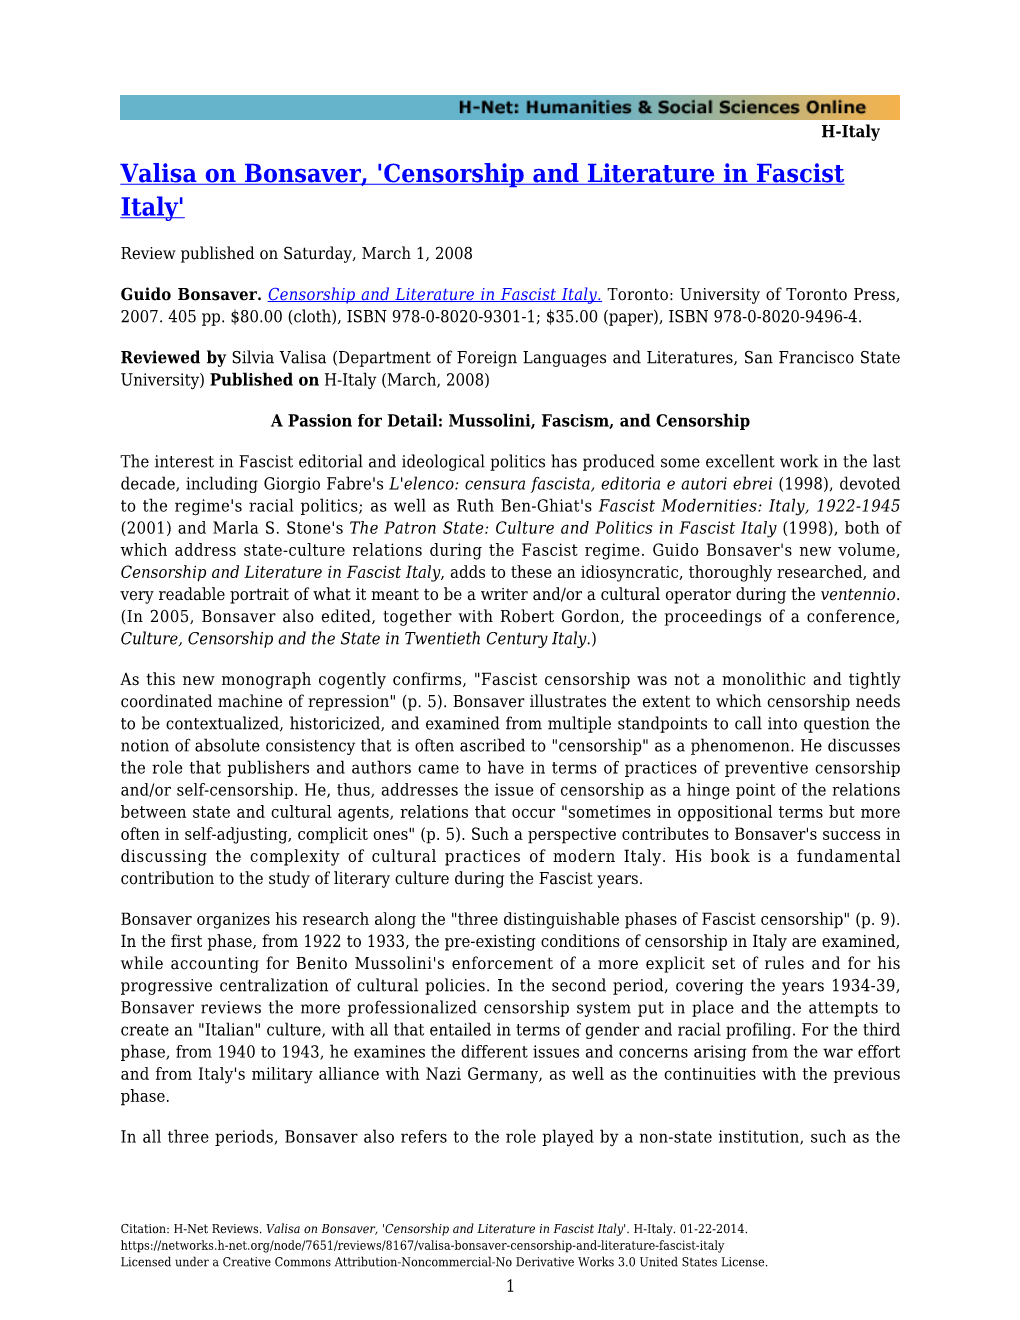 Censorship and Literature in Fascist Italy'